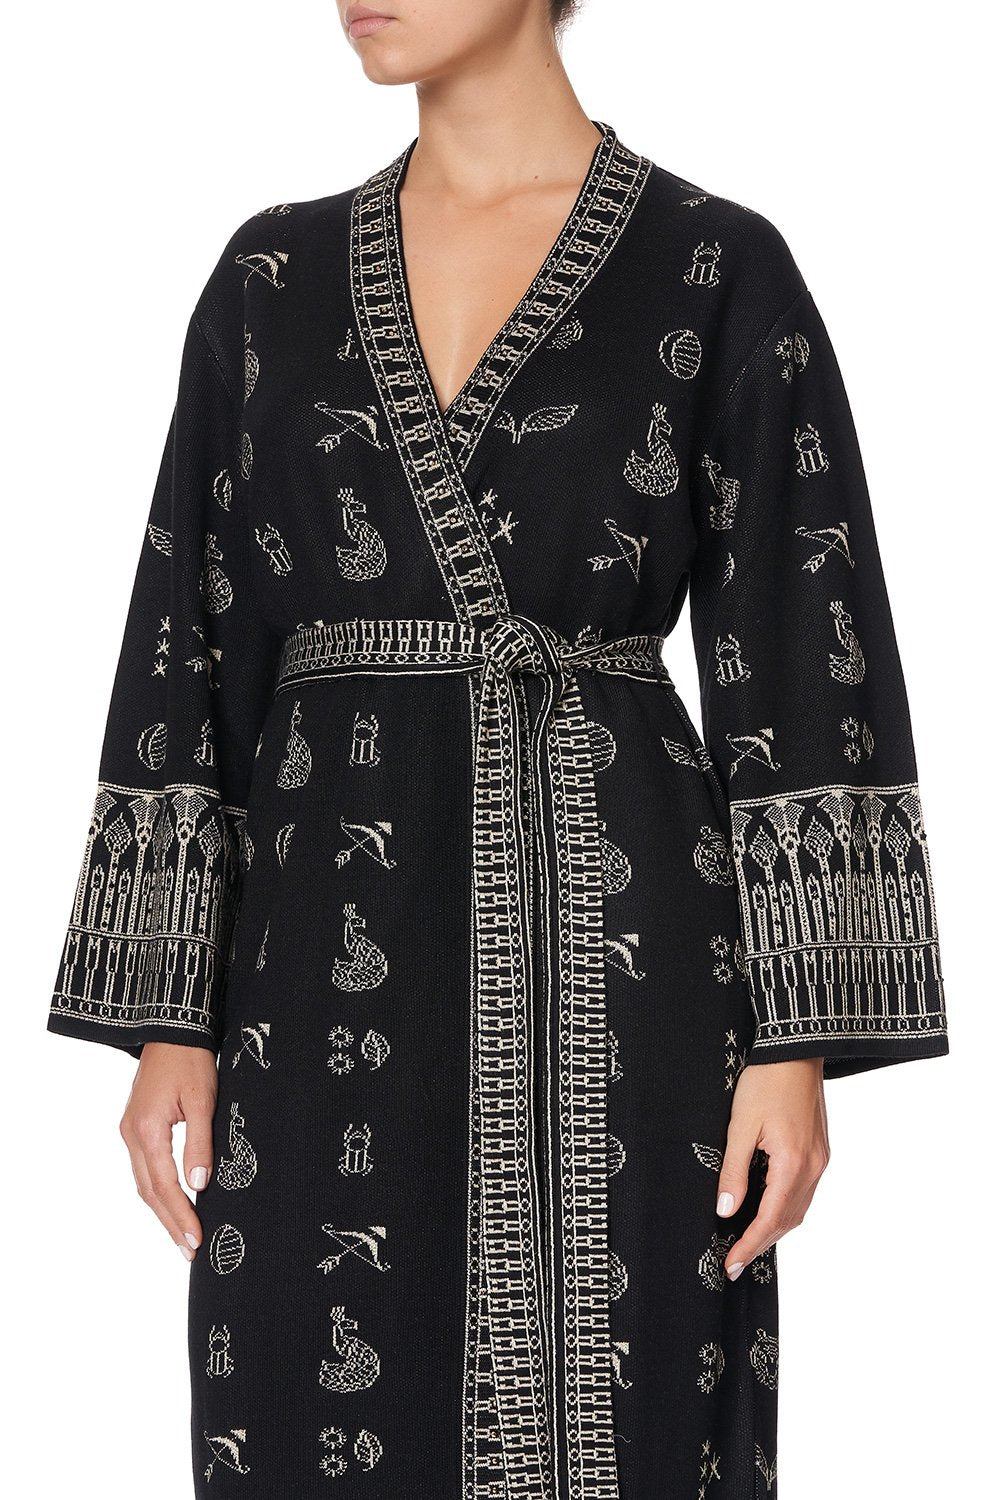 KNIT JACQUARD ROBE WITH WIDE SLEEVE COBRA KING